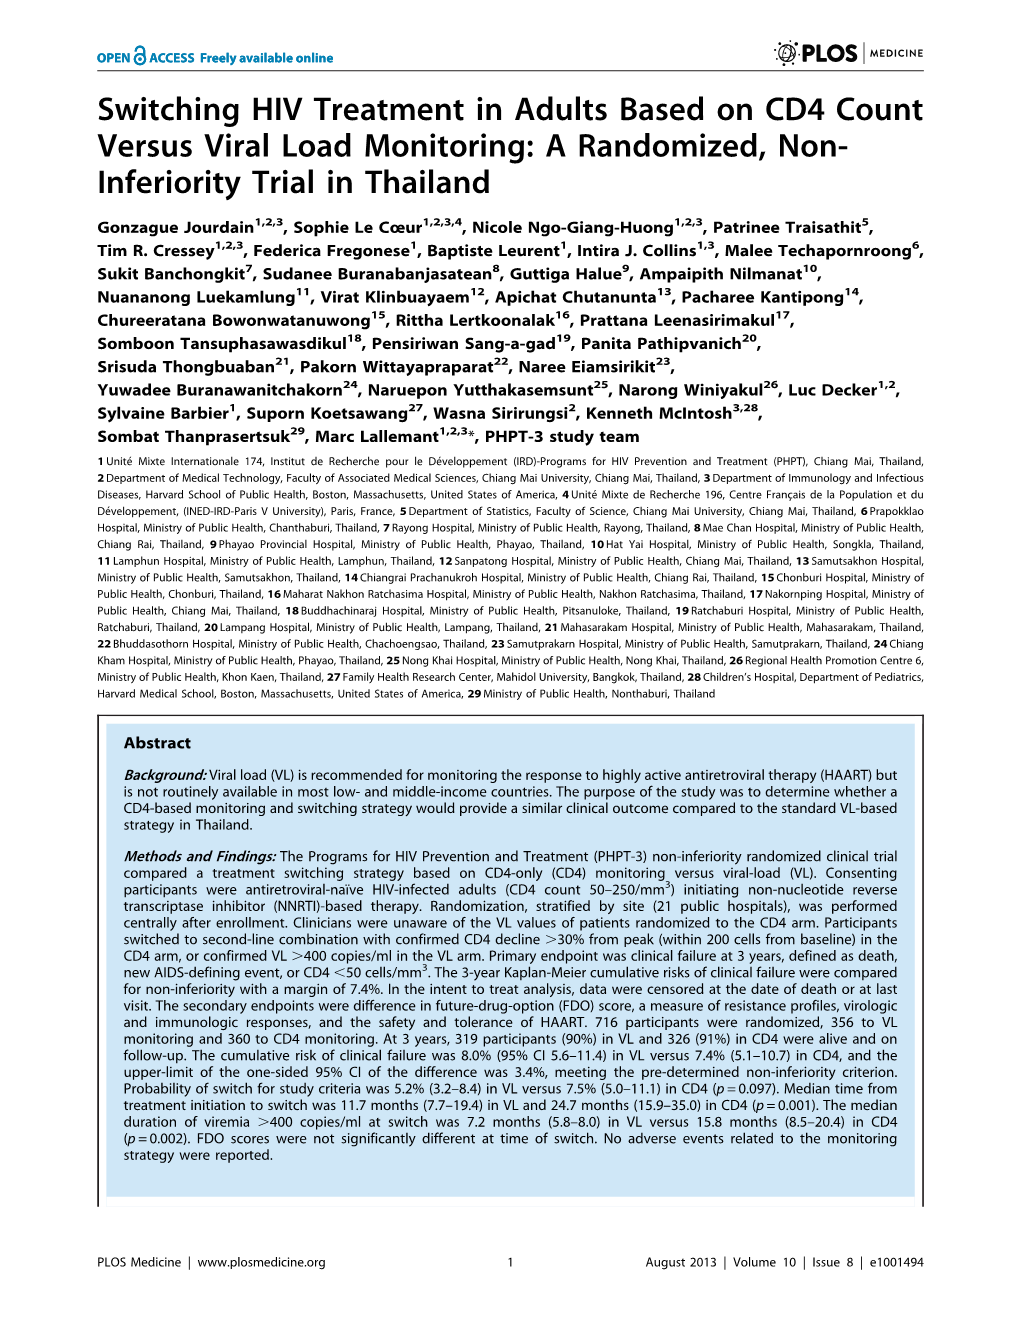 Switching HIV Treatment in Adults Based on CD4 Count Versus Viral Load Monitoring: a Randomized, Non- Inferiority Trial in Thailand